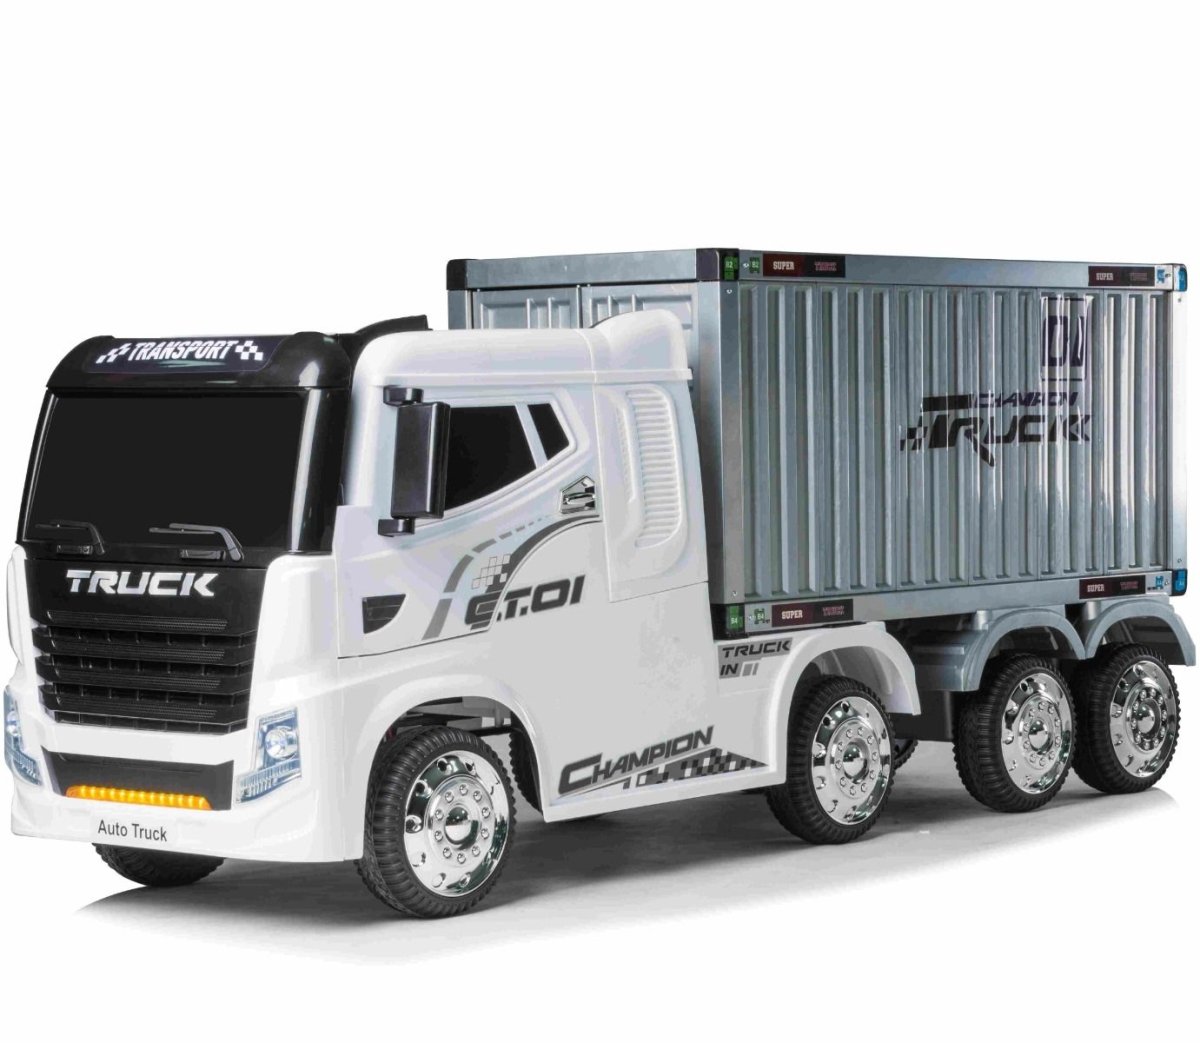 12V 4WD Ride On Big Rig Kids’s Electric Container Lorry